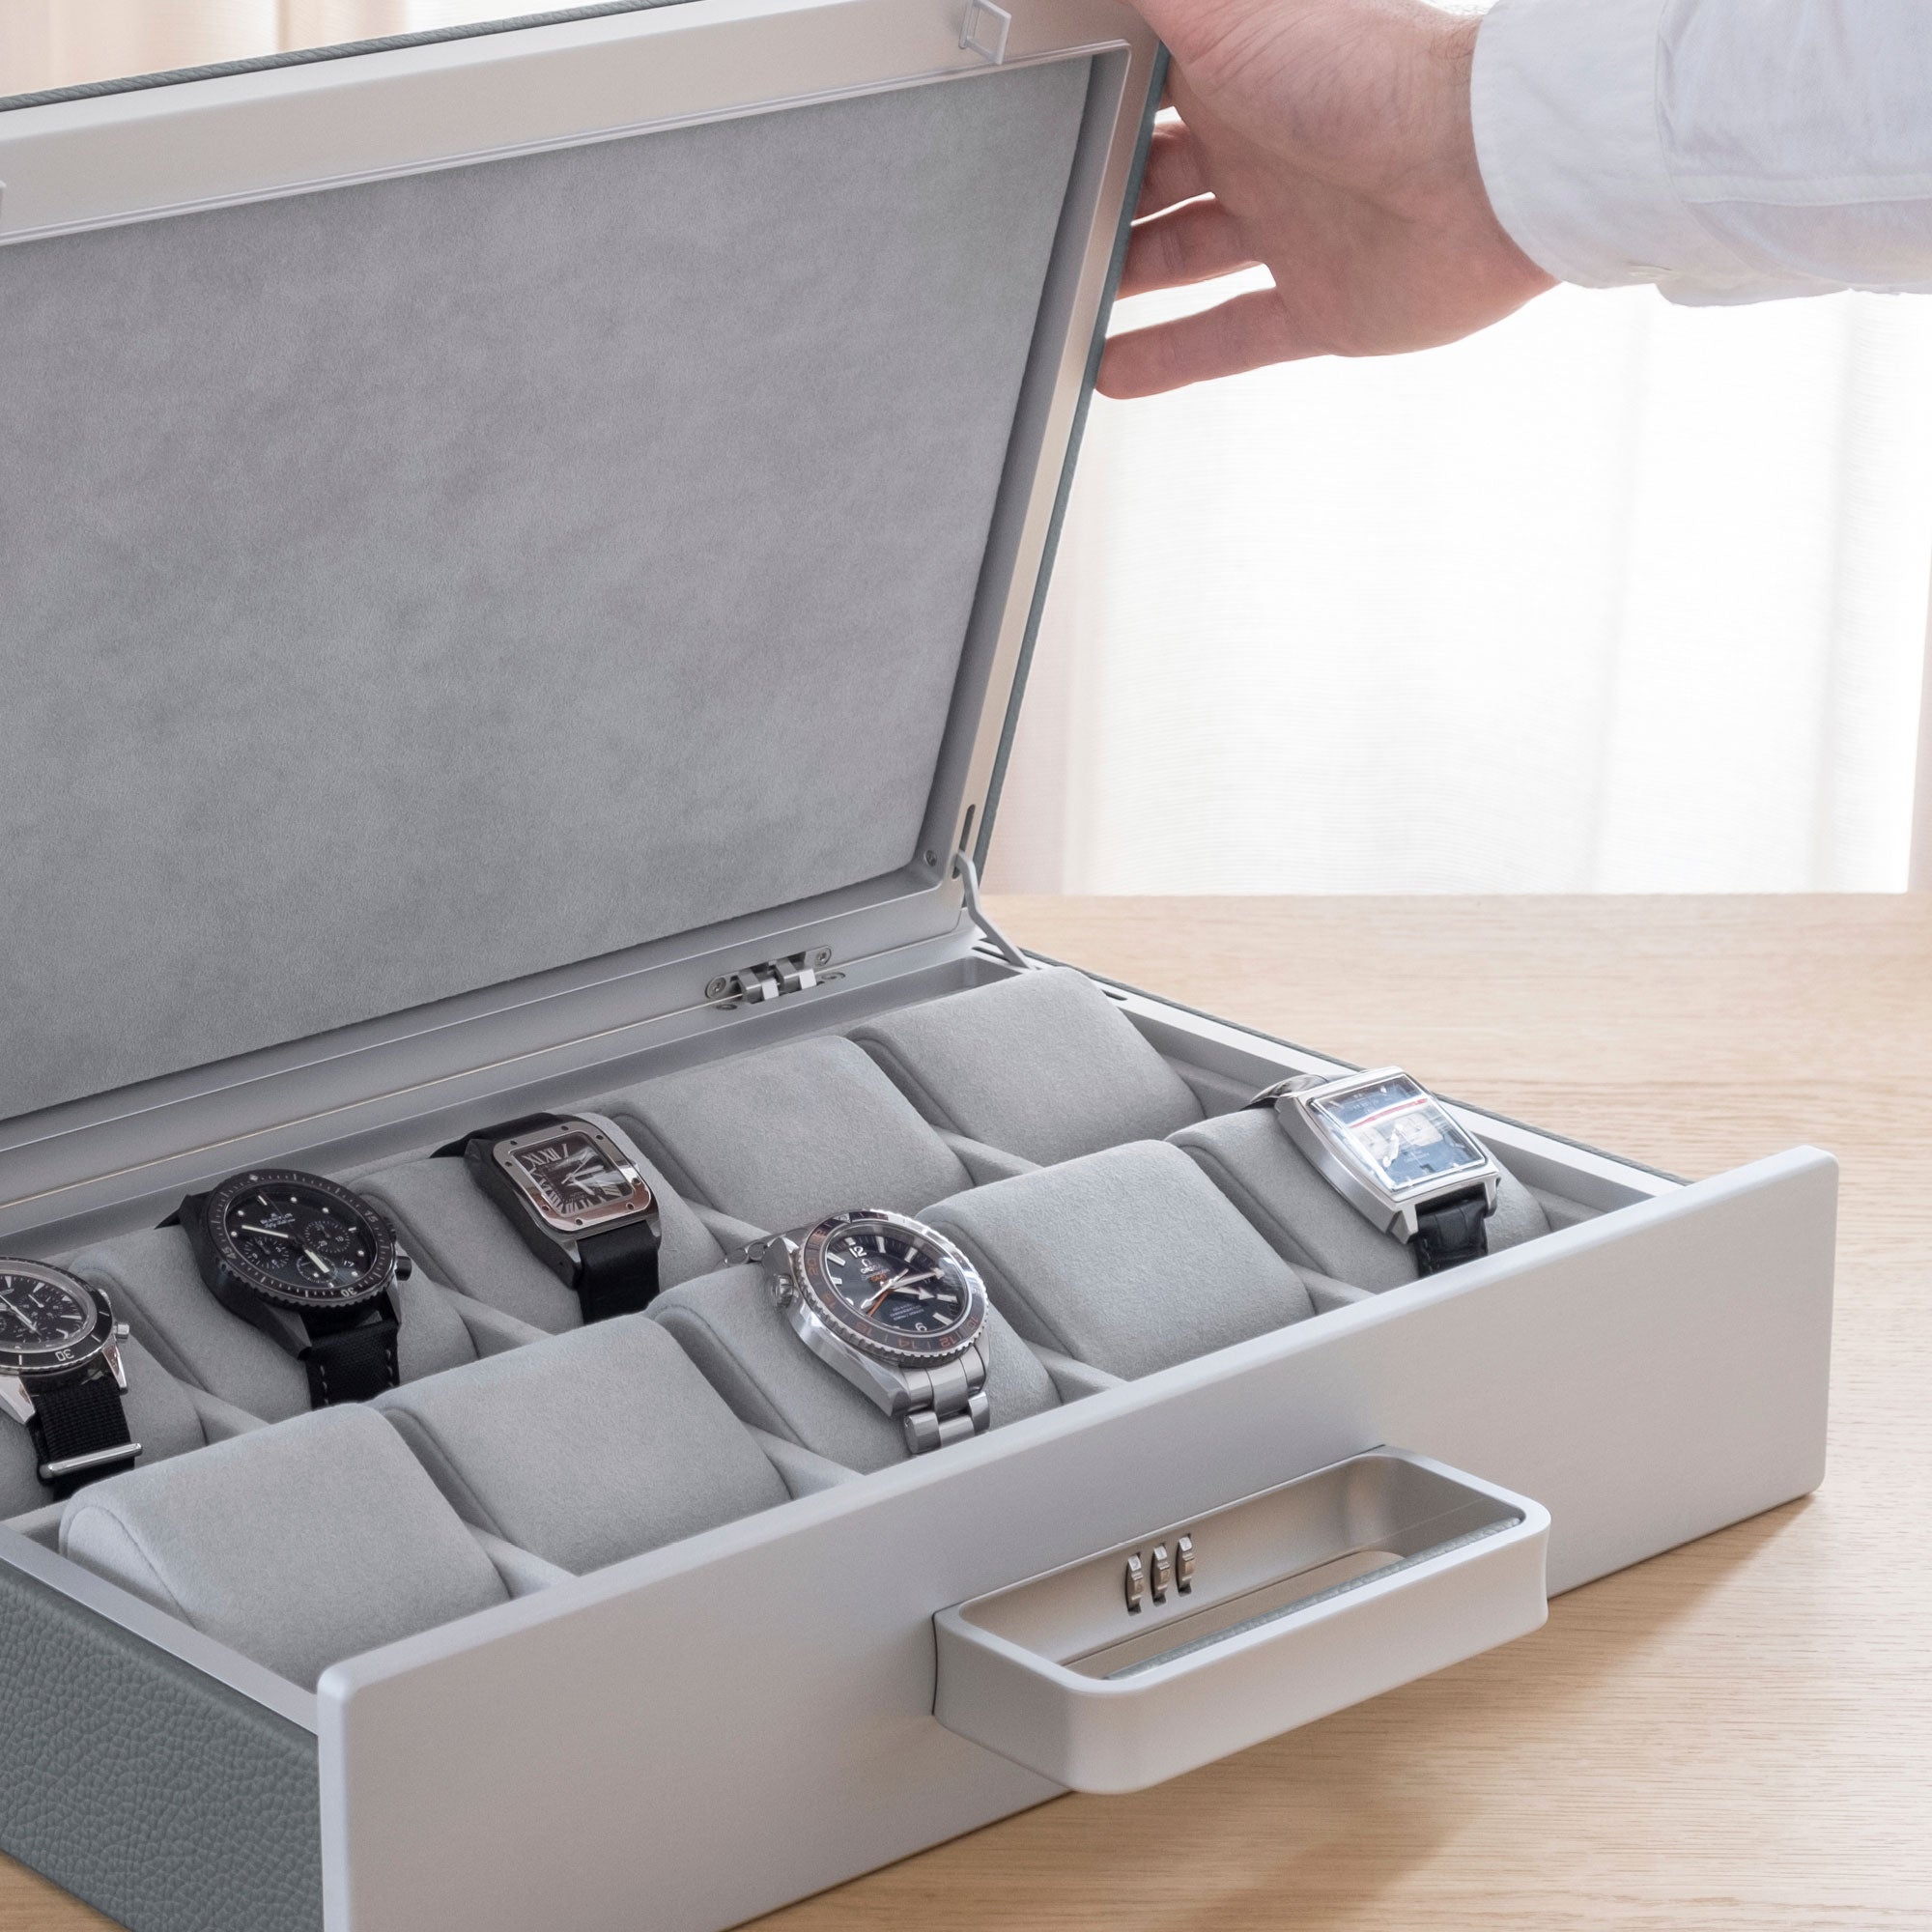 Lifestyle shot of Mackenzie Watch briefcase 10 filled with luxury watches including Blancpain, Tag Heuer and Jaeger-LeCoultre